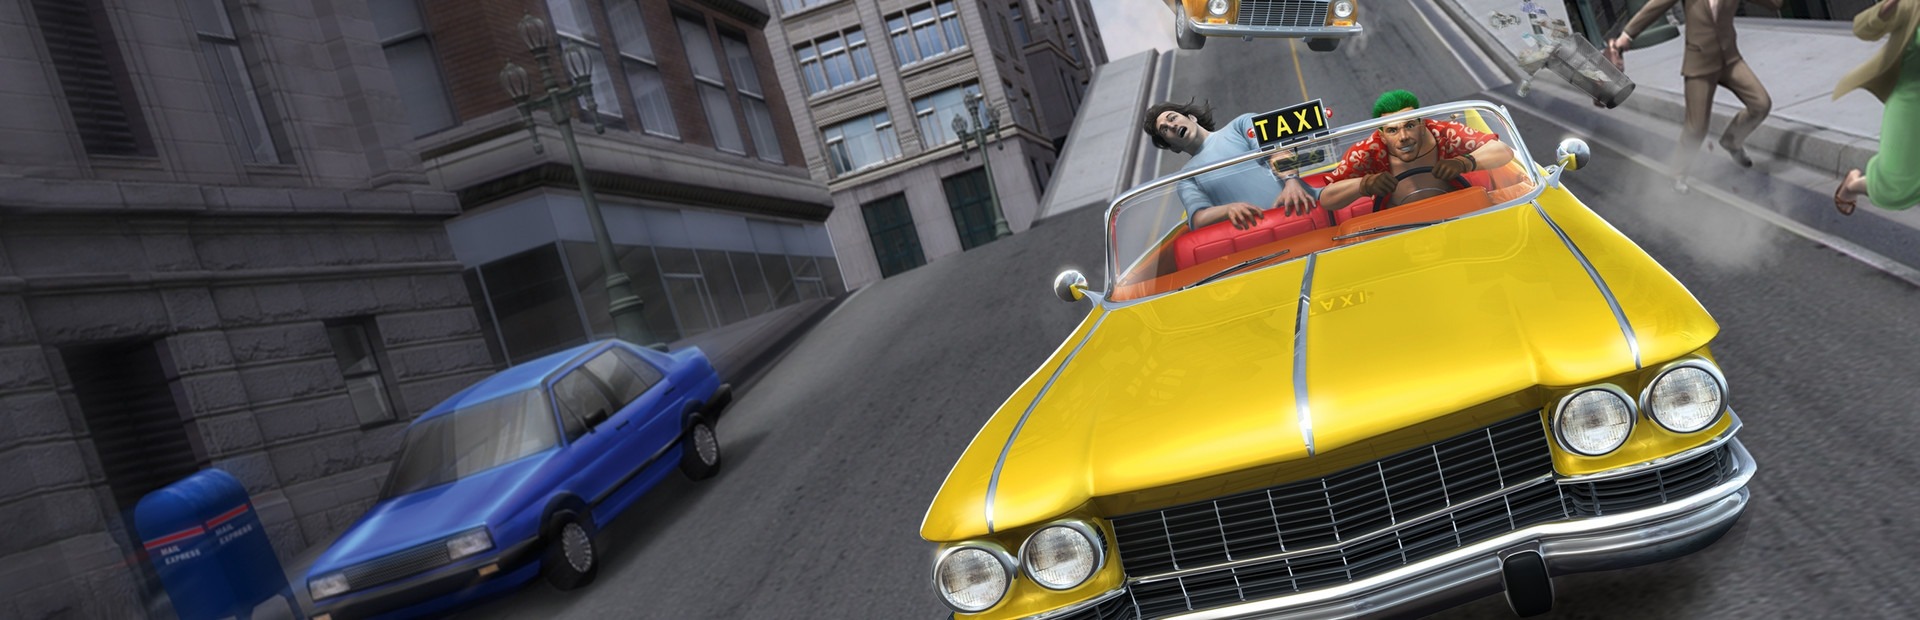 Crazy Taxi Review - Don't Step on the Gas for This One - AndroidShock